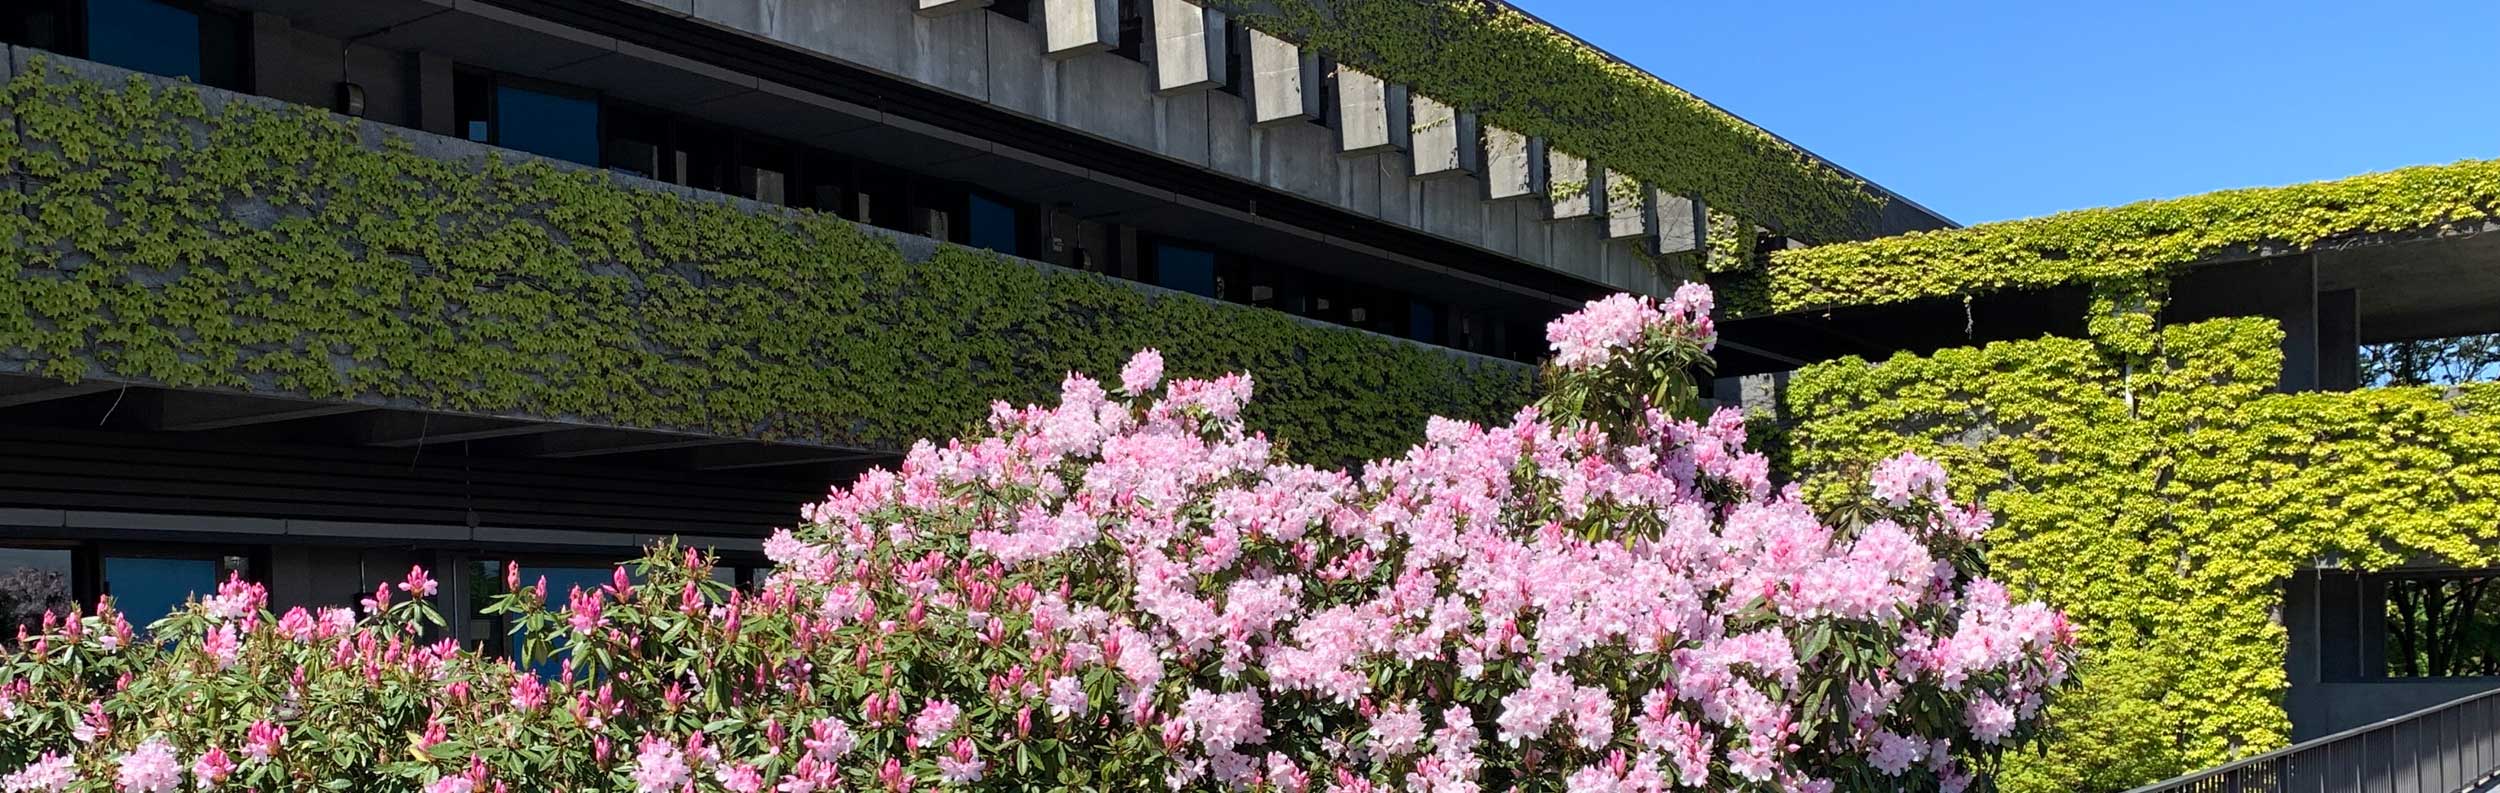  pink flowers and green ivy on building 